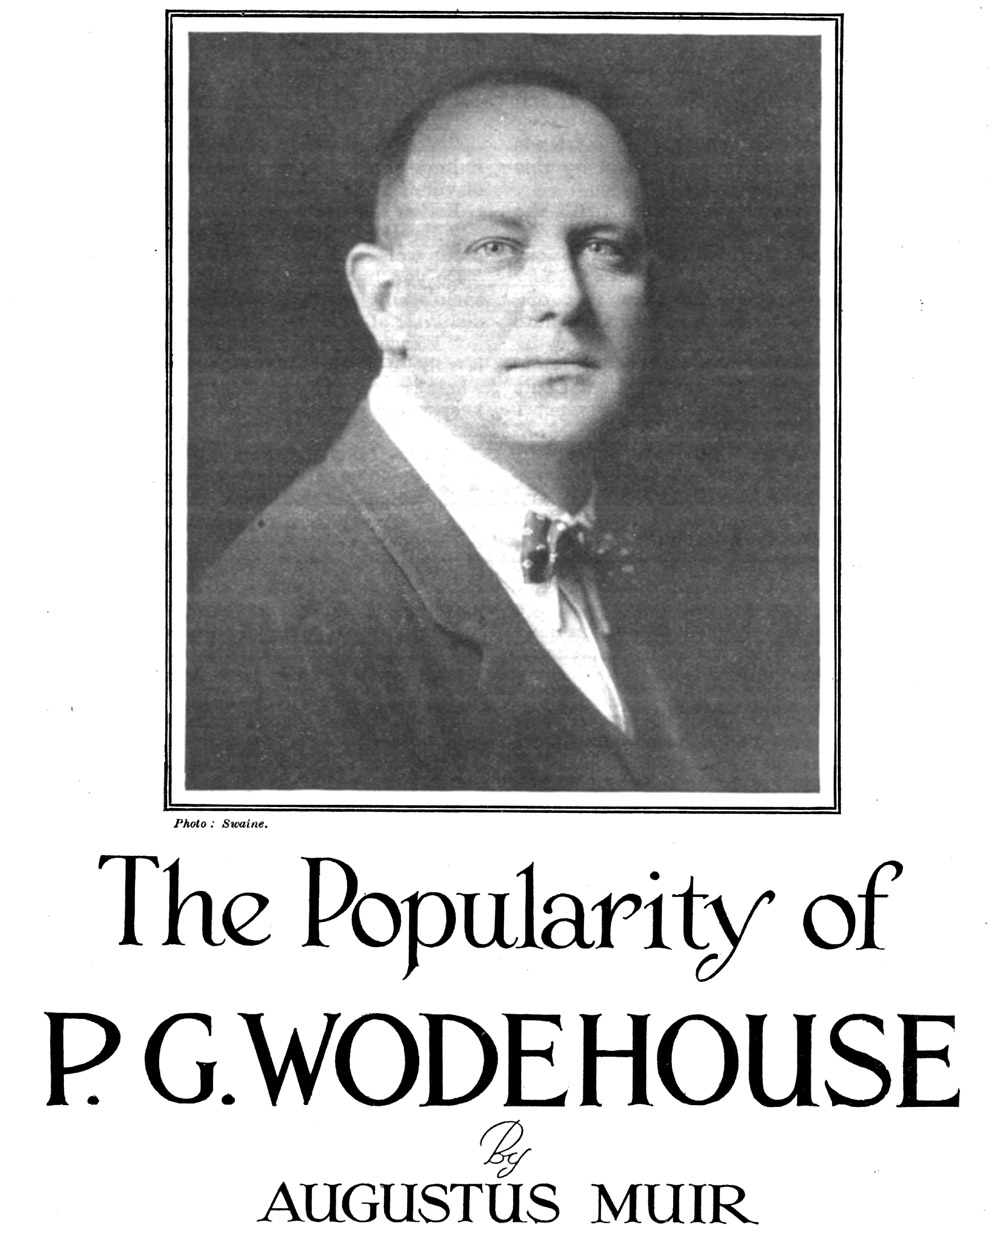 The Popularity of P. G. Wodehouse, by Augustus Muir